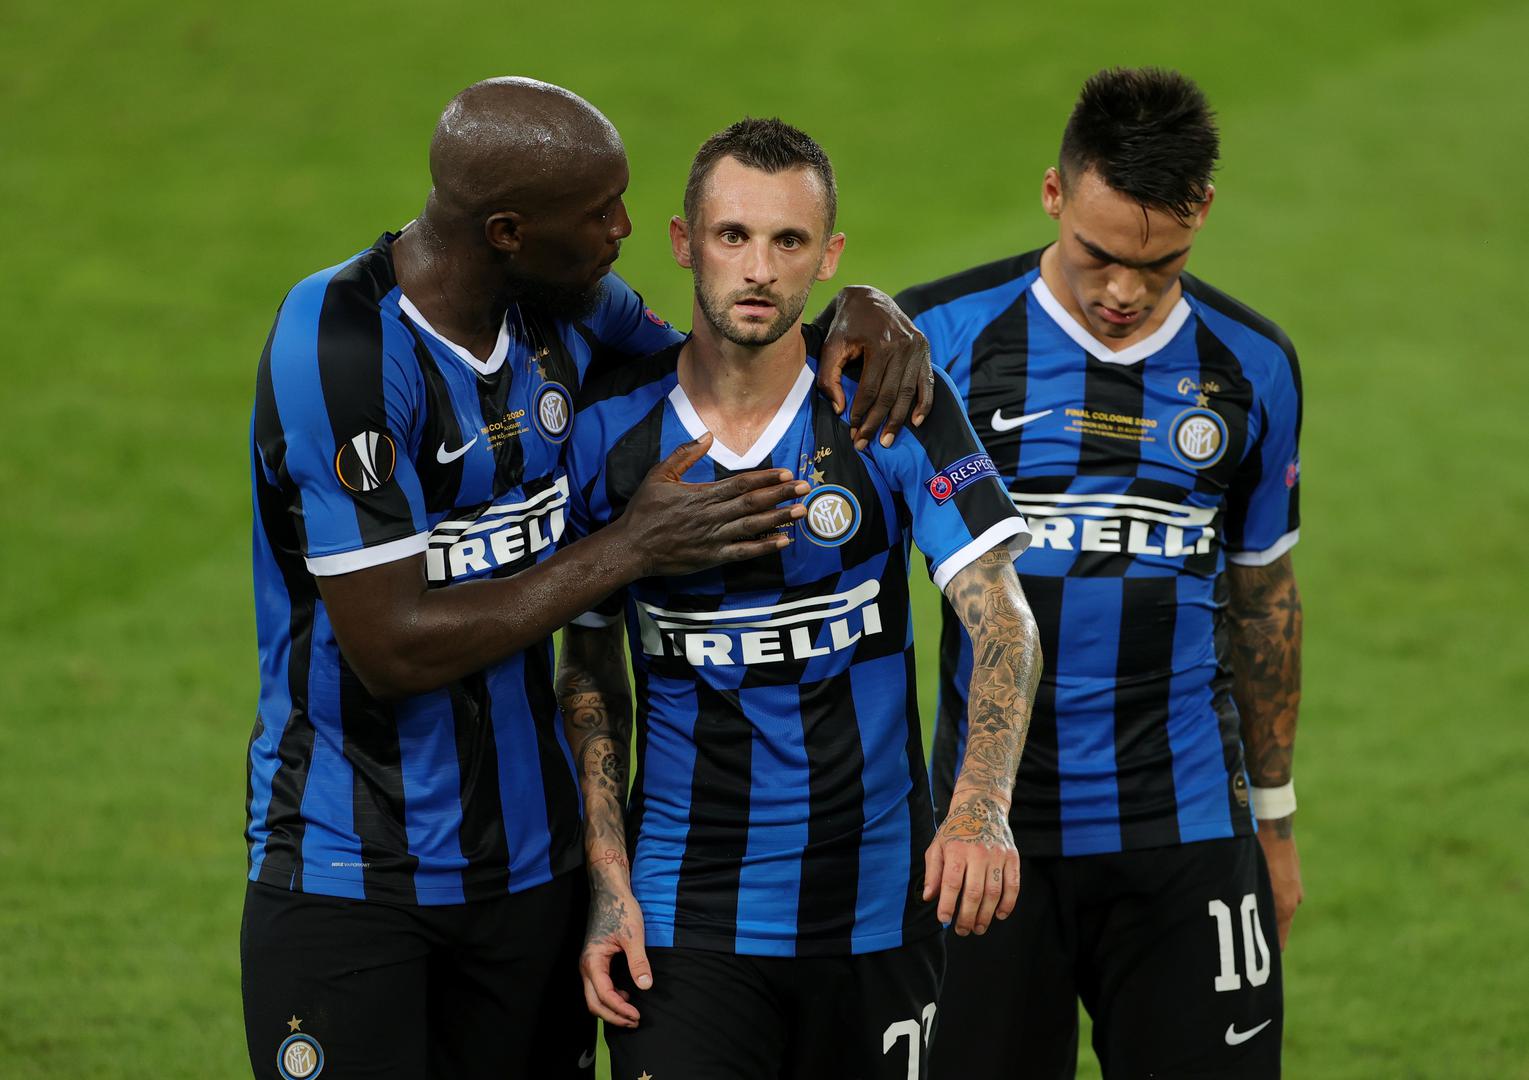 Europa League - Final - Sevilla v Inter Milan Soccer Football - Europa League - Final - Sevilla v Inter Milan - RheinEnergieStadion, Cologne, Germany - August 21, 2020   Inter Milan's Romelu Lukaku with Marcelo Brozovic and Lautaro Martinez at half time, as play resumes behind closed doors following the outbreak of the coronavirus disease (COVID-19)   Friedemann Vogel/Pool via REUTERS POOL